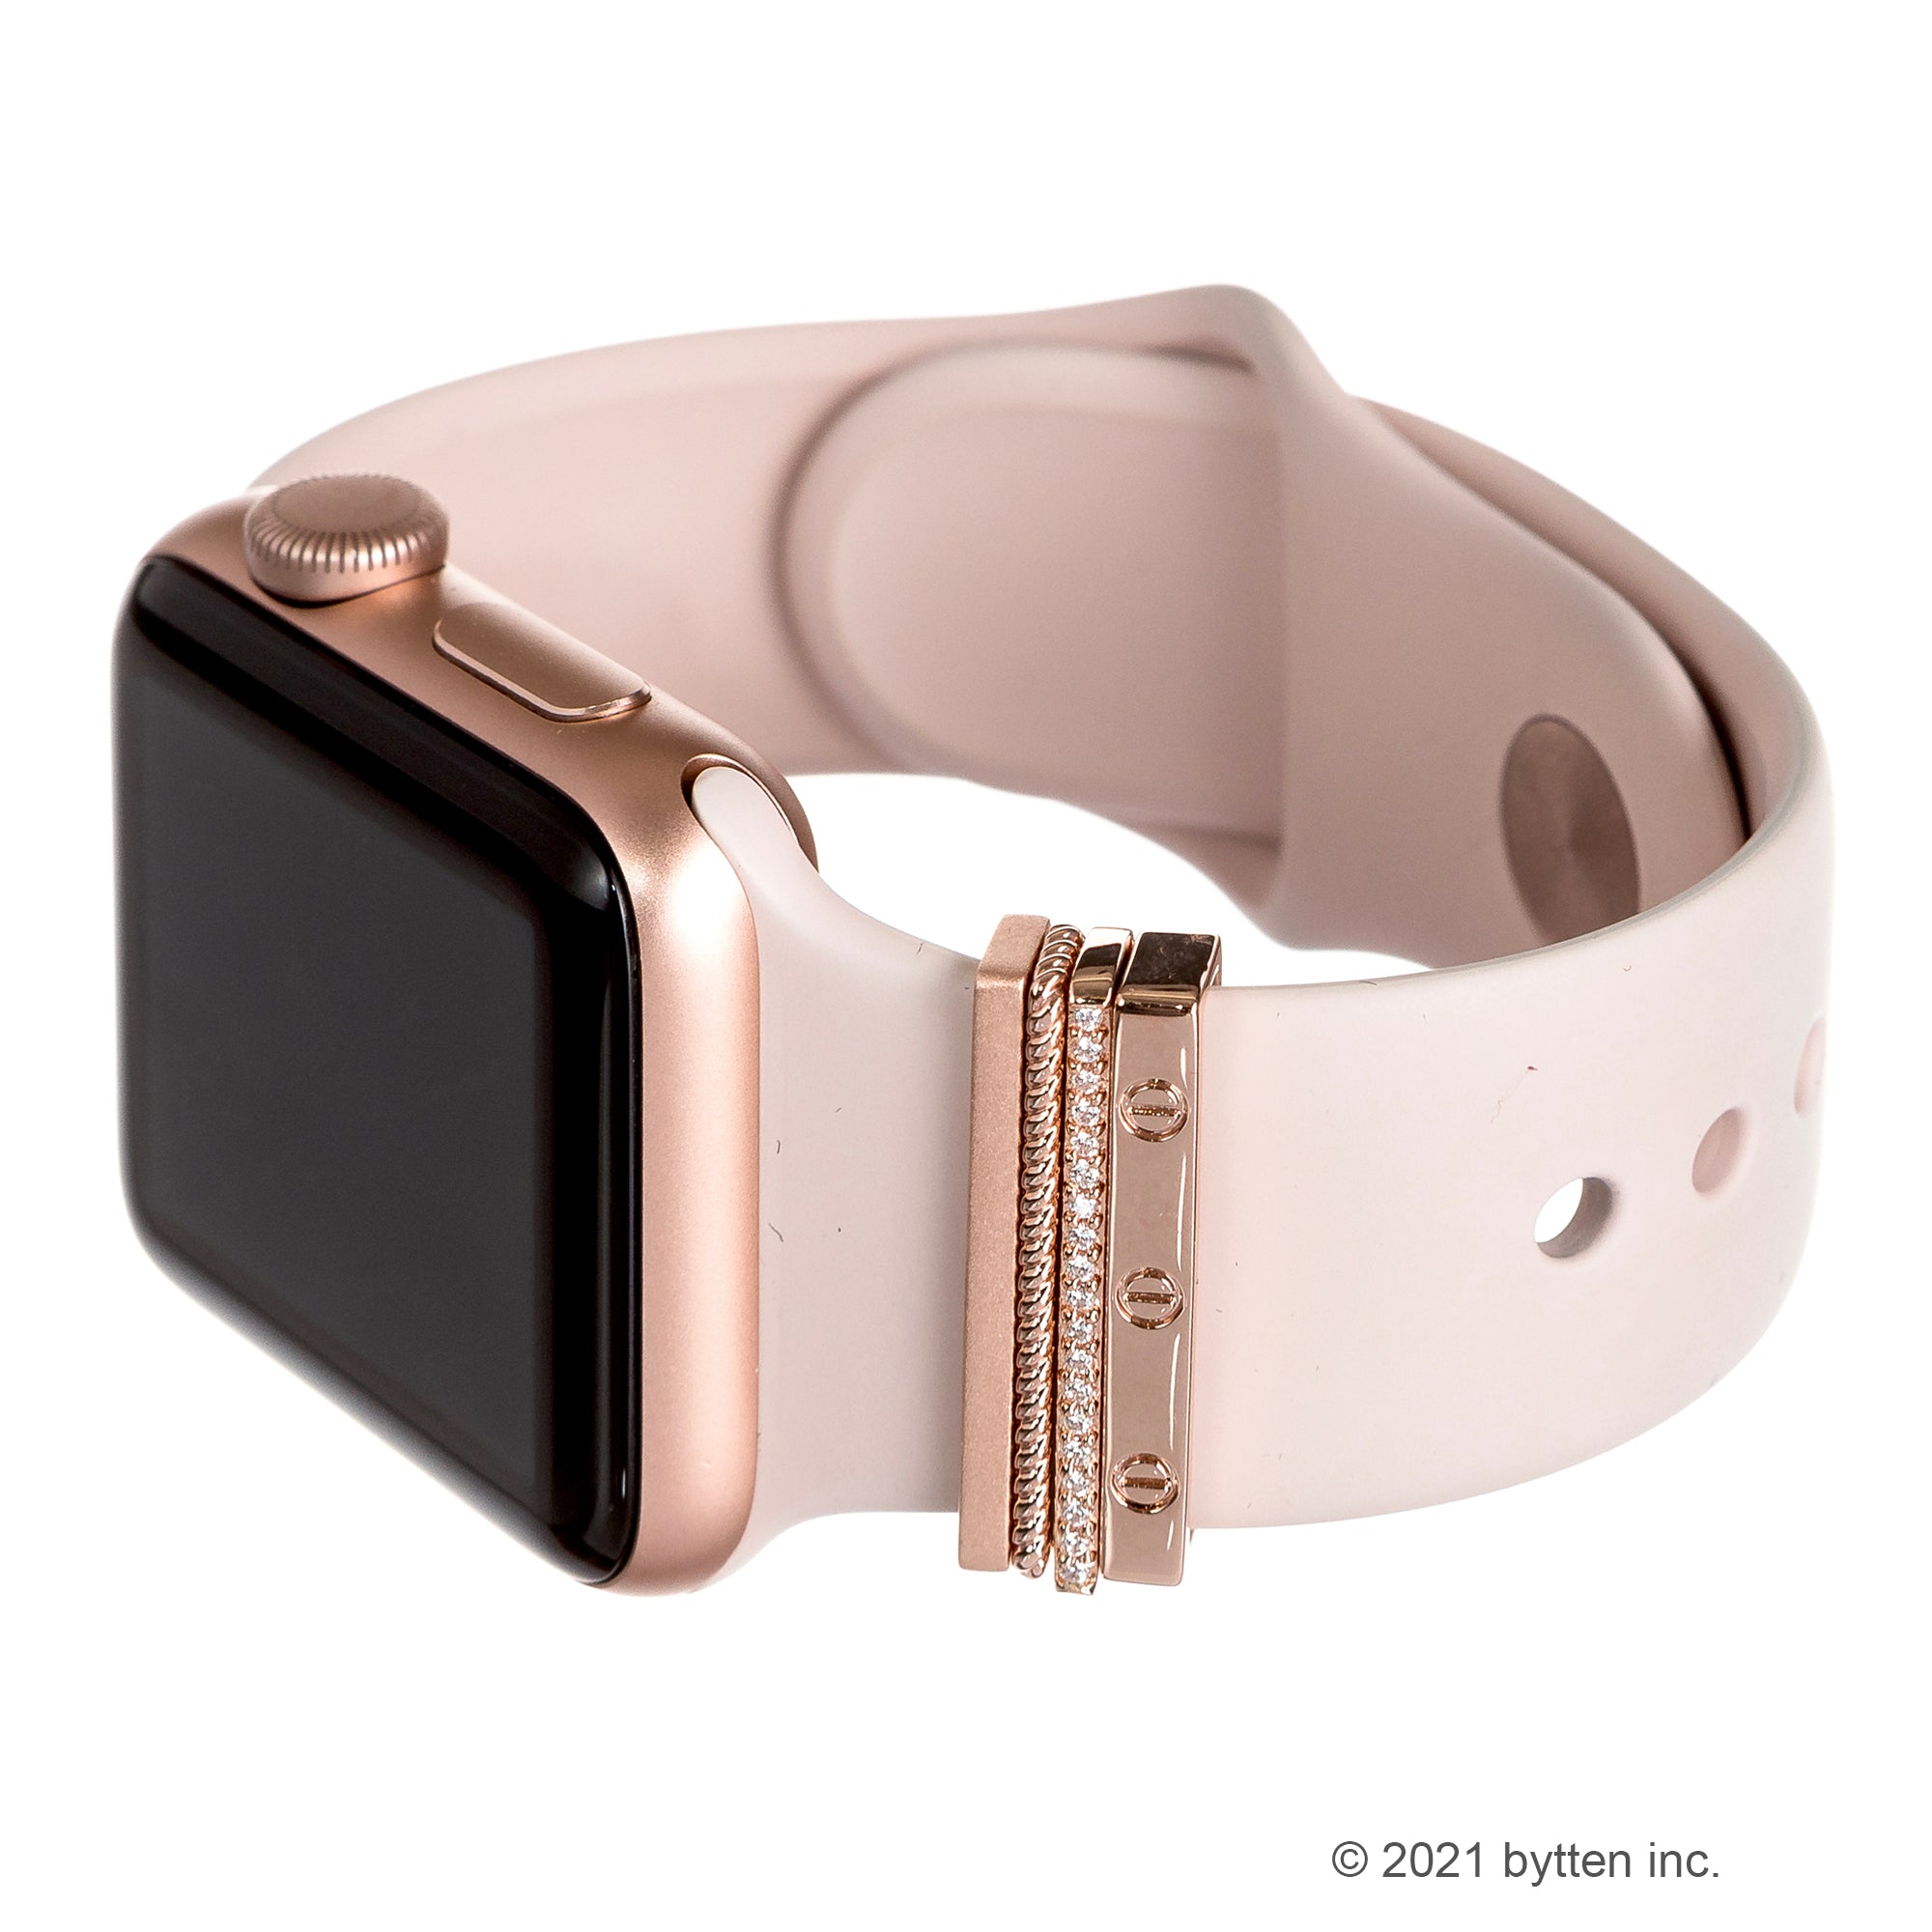 bytten rose gold Sweden stack on rose gold Apple Watch with pink blush bytten band